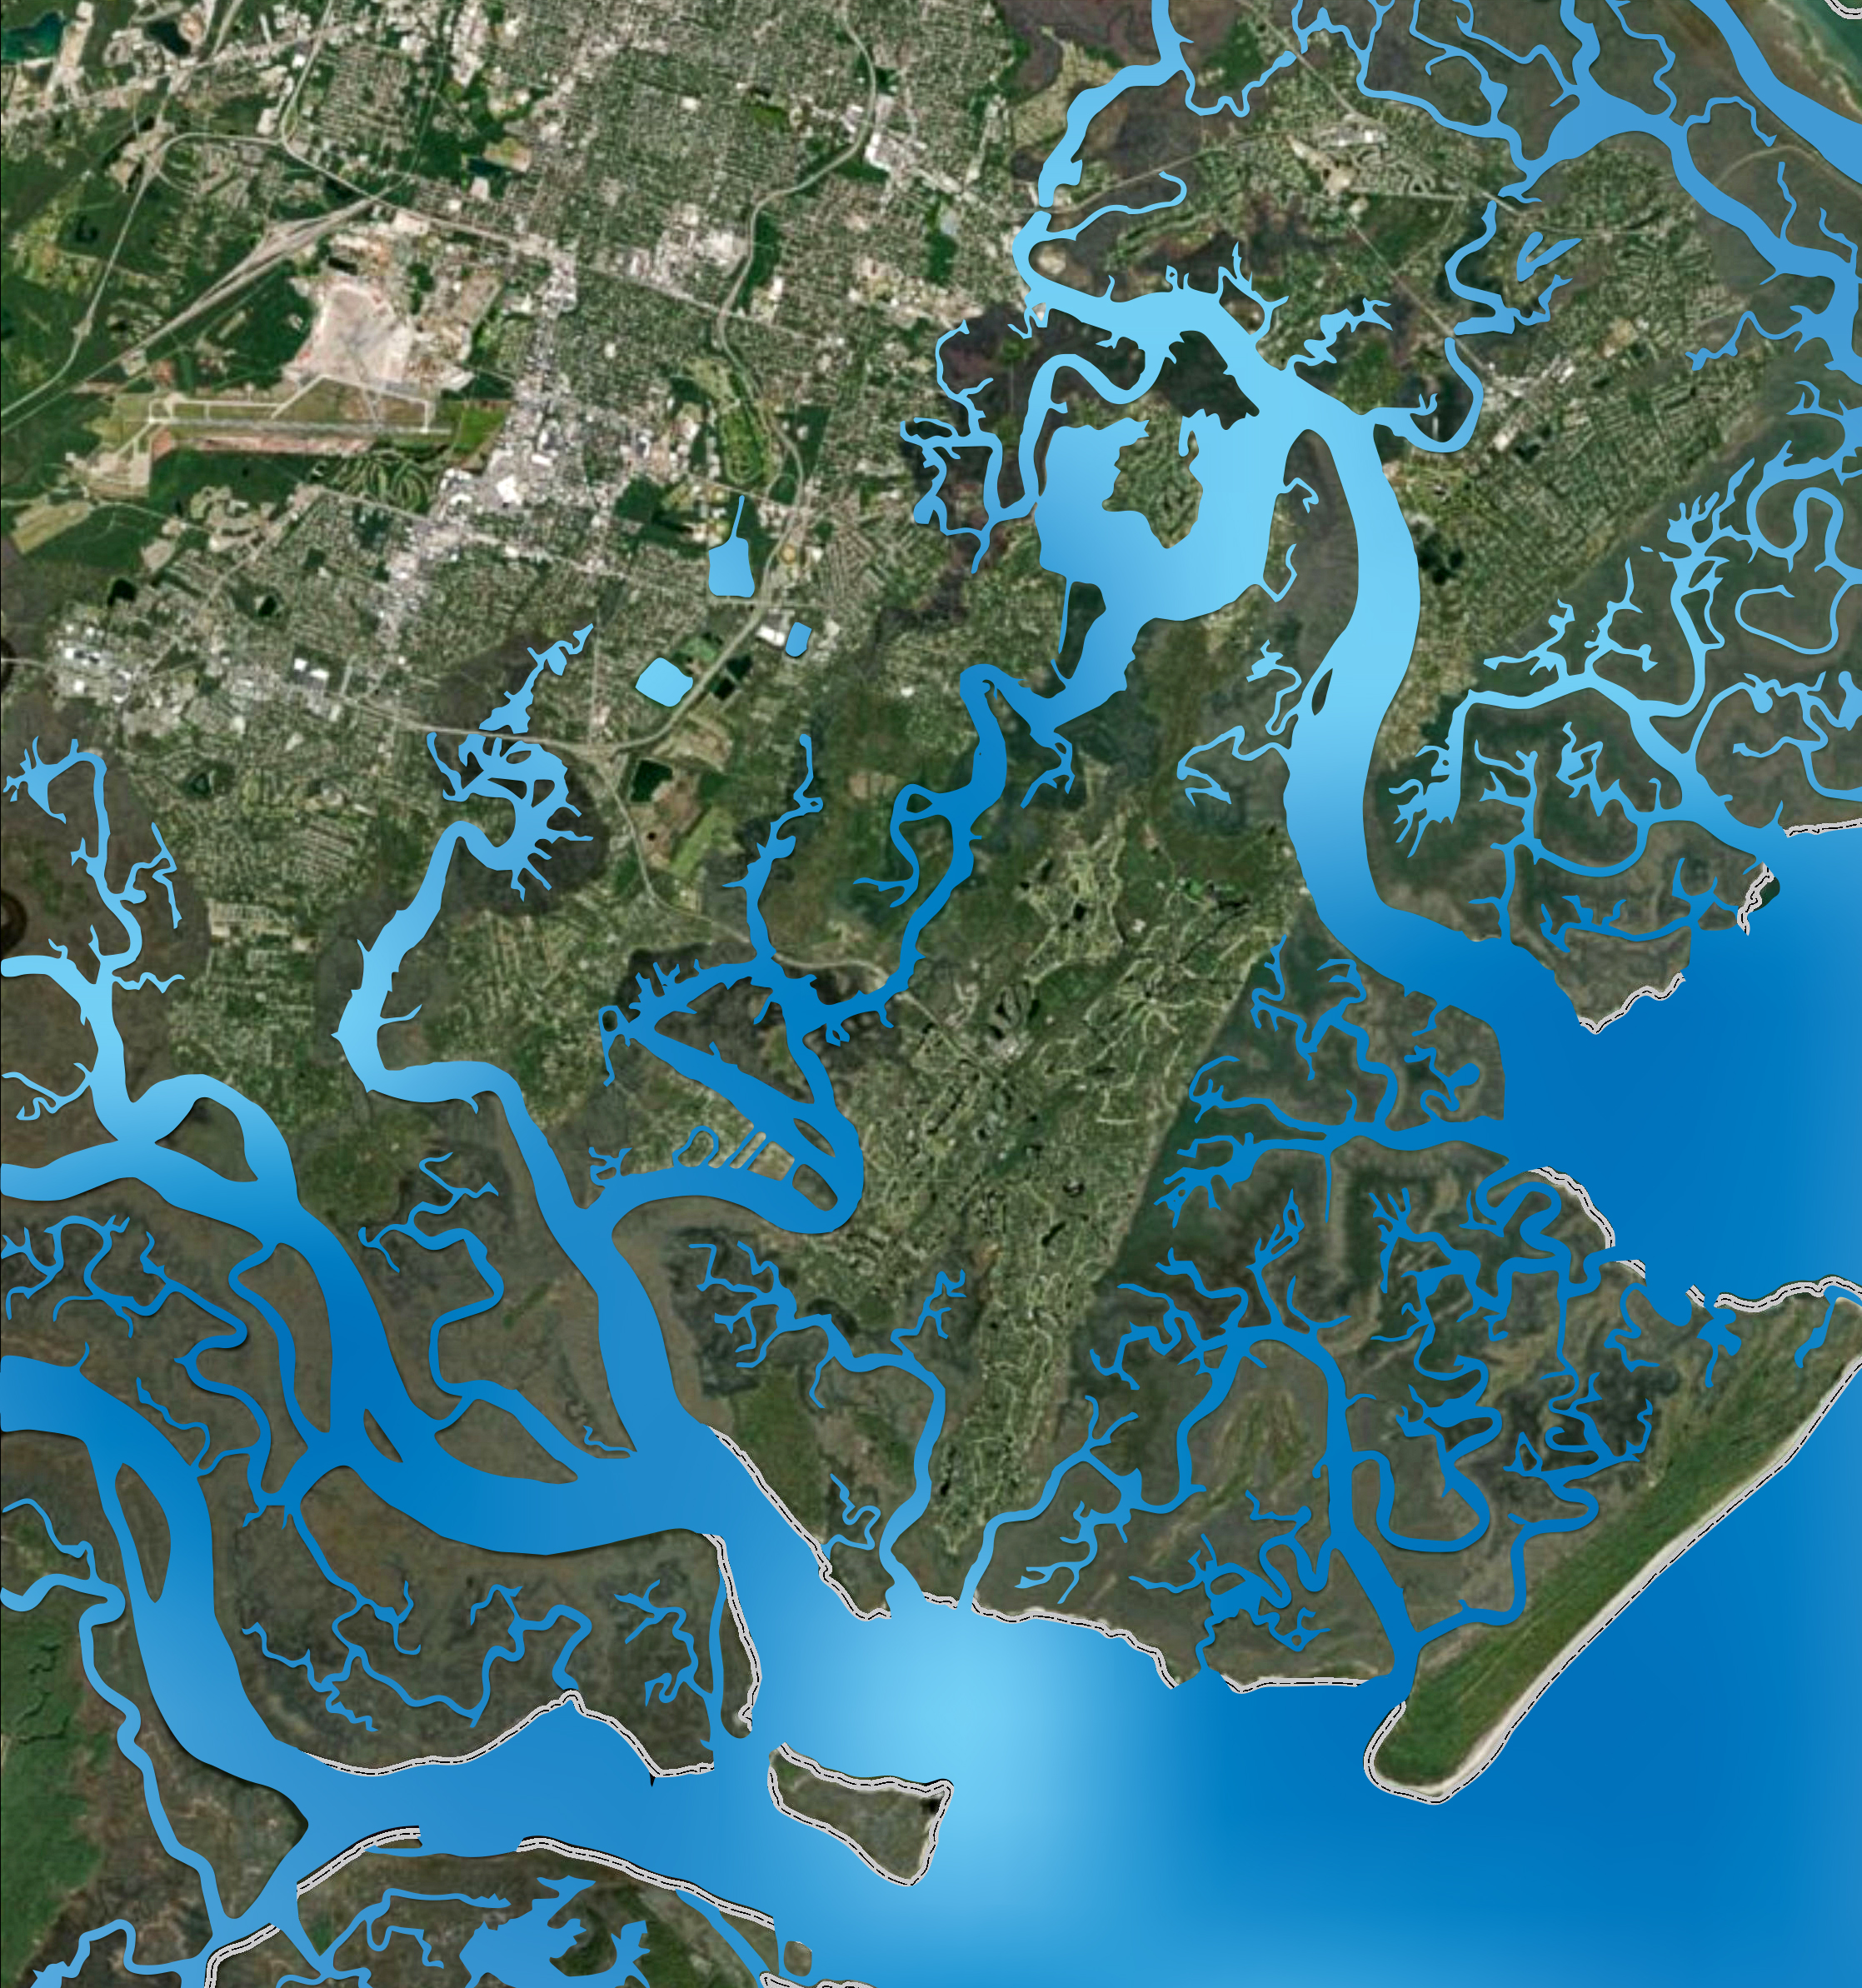 The southern United States is disproportionately affected by hurricanes. Understanding these and other coastal threats is among the priorities for the South Big Data Innovation Hub. (Image from Sagis.org)